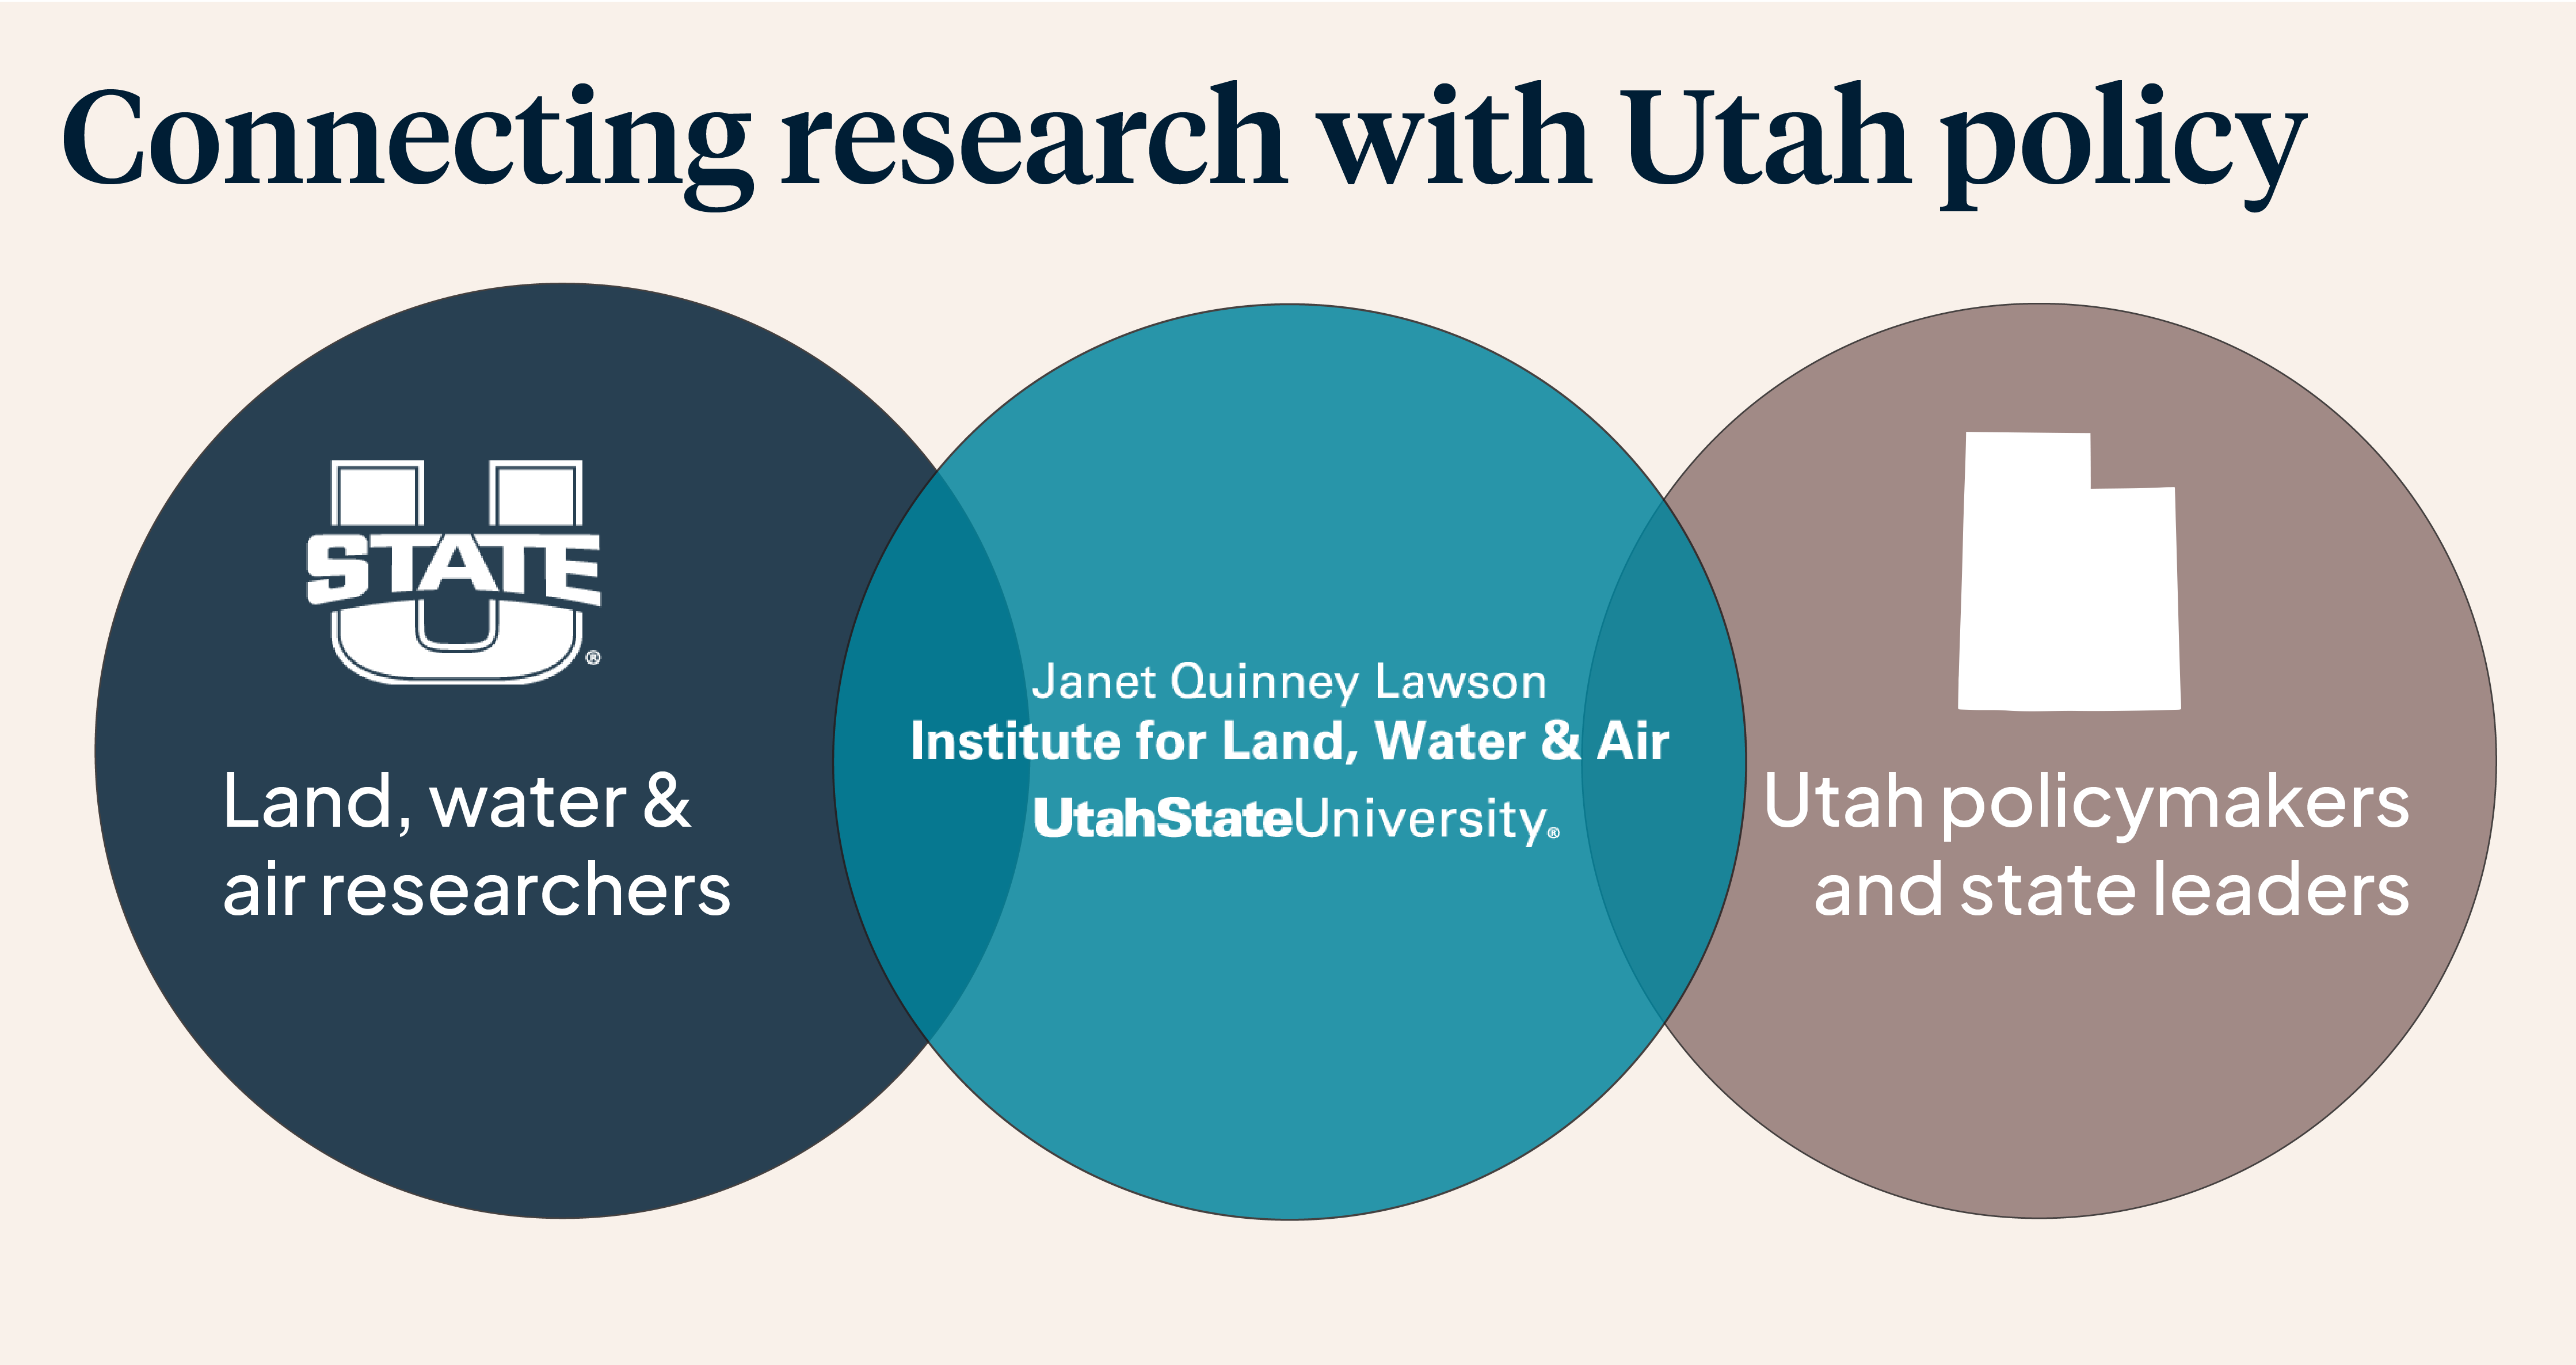 Connecting research with Utah policy. A venn diagram with three circles: 1. Utah State Land water and air researchers, 2. Janet Quinney Lawson Institiute for Land, Water, and Air at Utah State University, 3. Utah policymakers and state leaders. The middle circle (ILWA) overlaps a bit with the outer two circles, demonstrating that ILWA bridges the gap between state government policymakers and USU researchers.